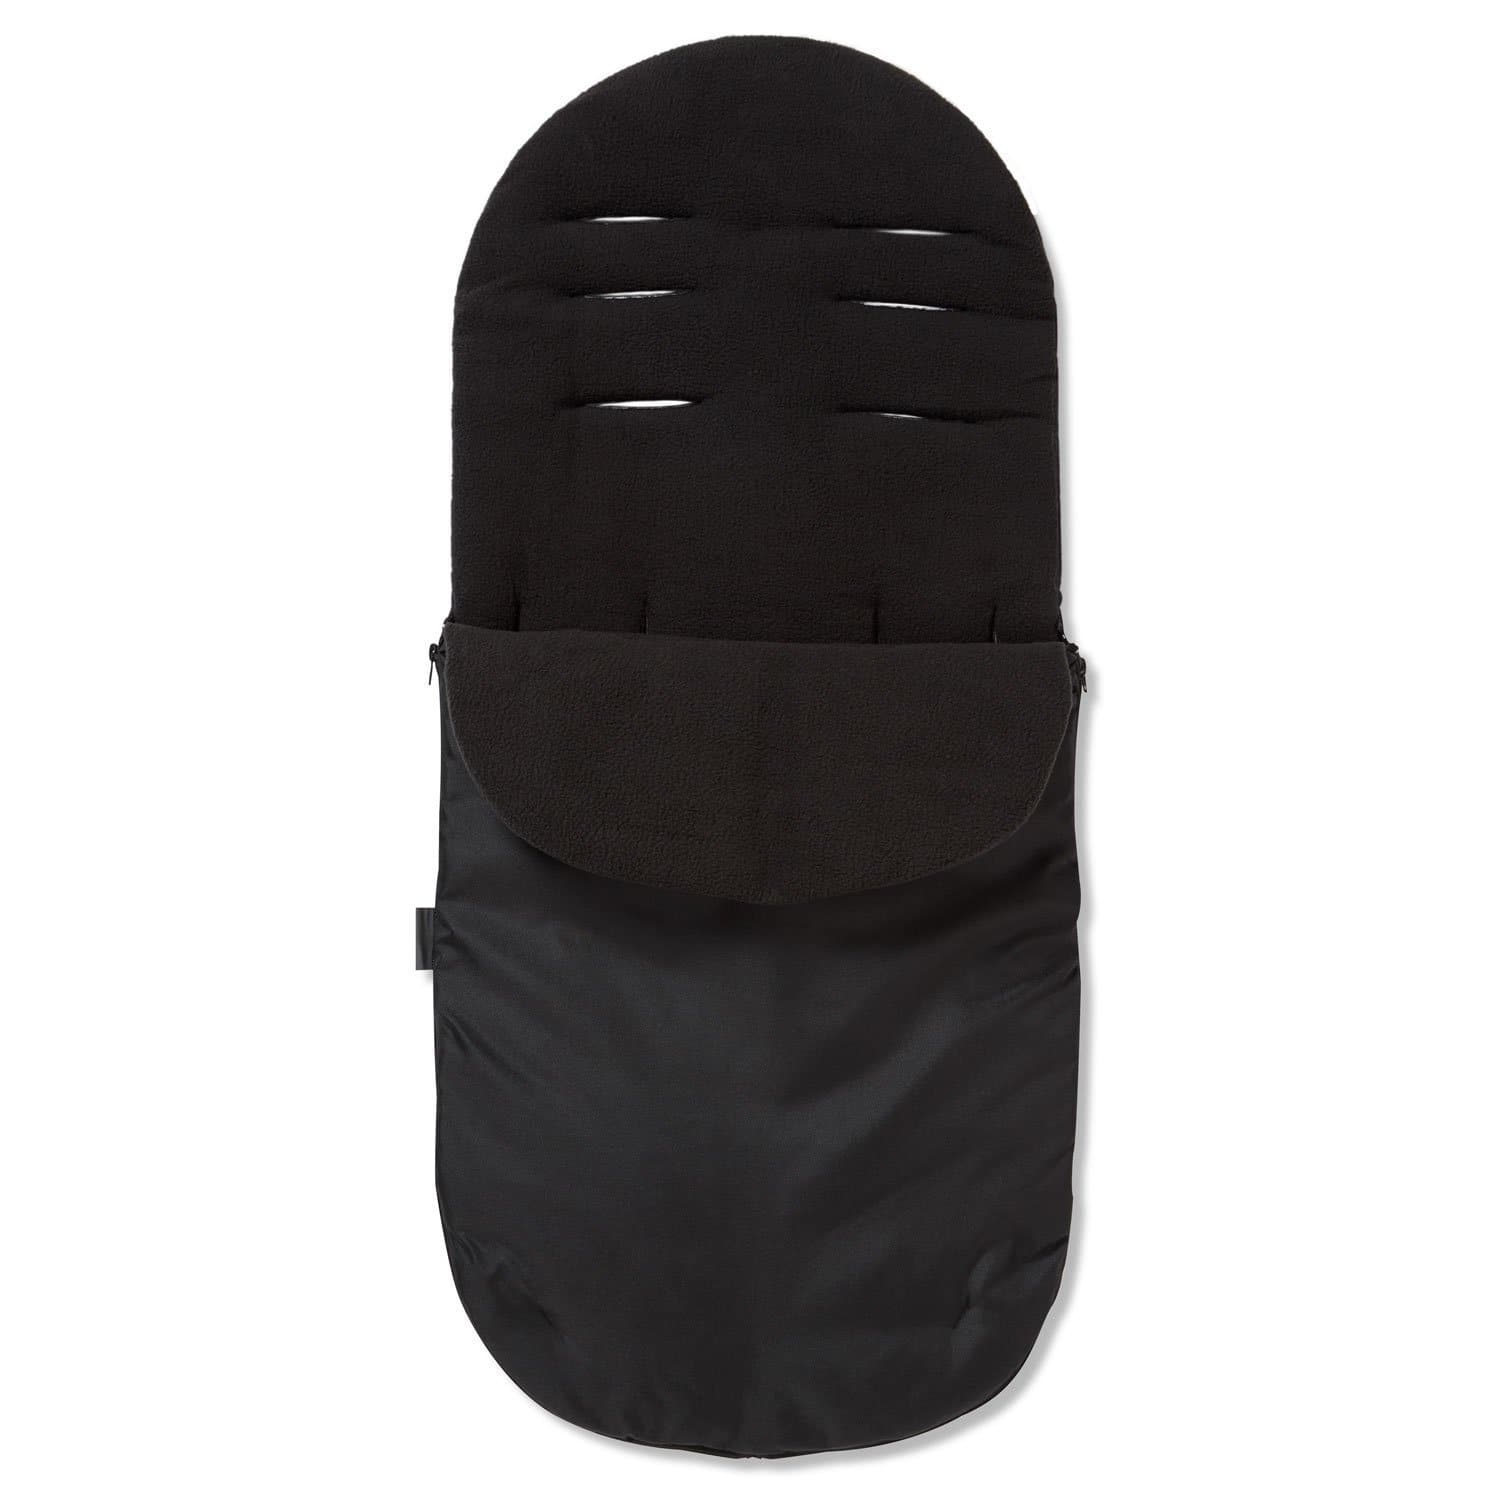 Footmuff / Cosy Toes Compatible with Babystyle - Black / Fits All Models | For Your Little One